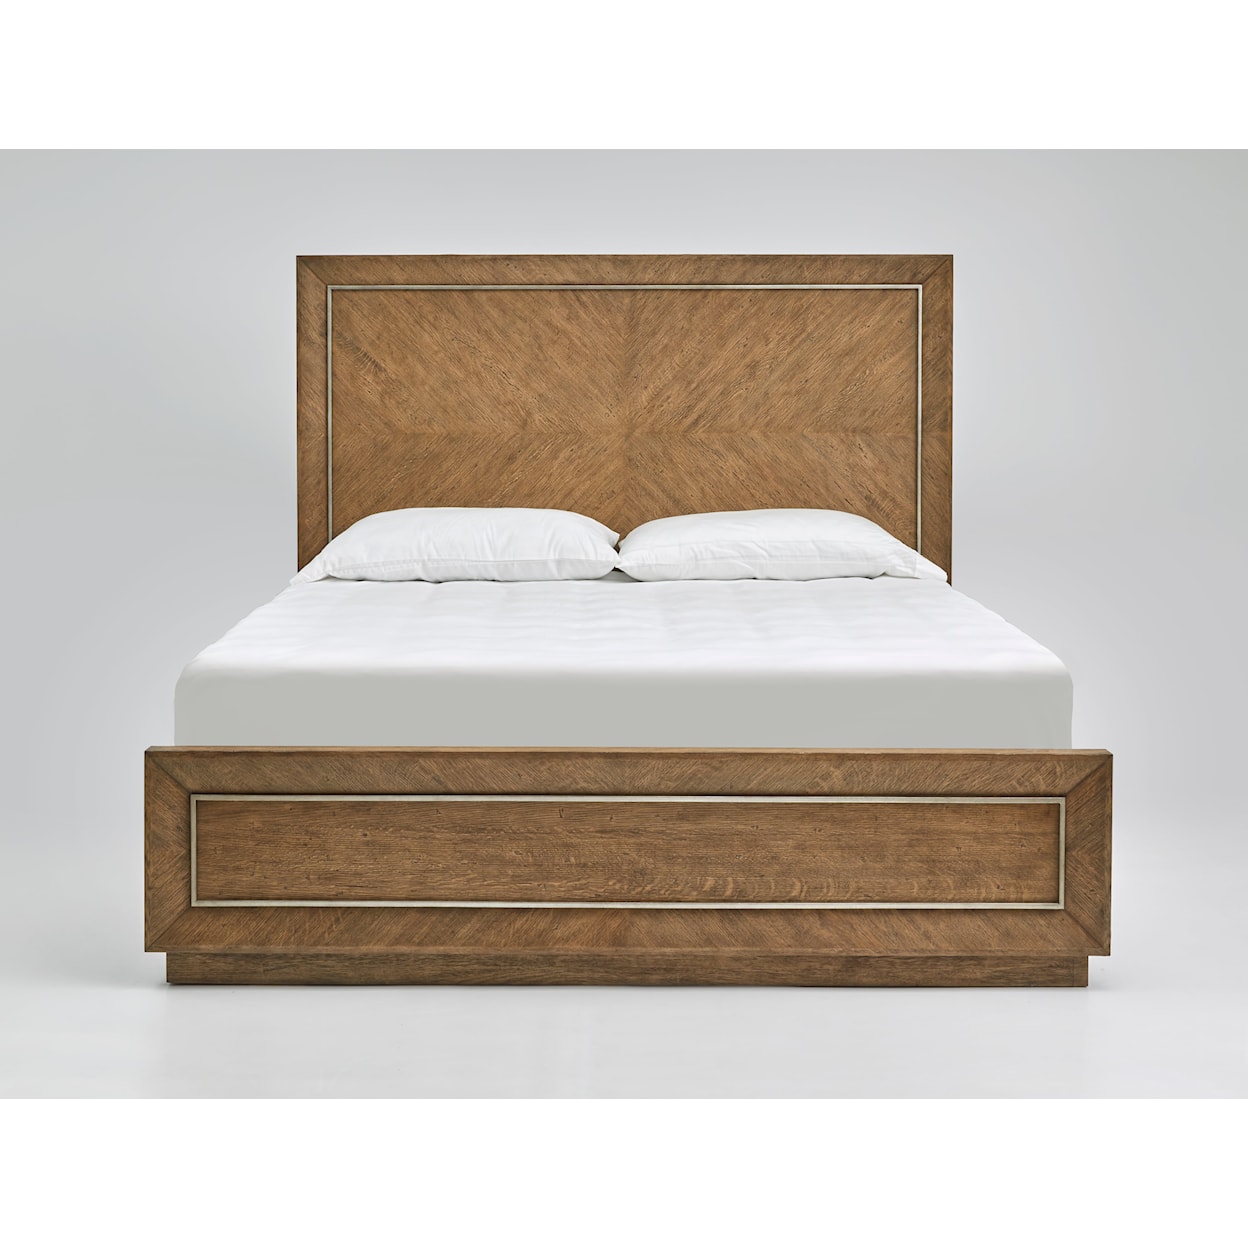 The Preserve Sugarland Queen Panel Bed